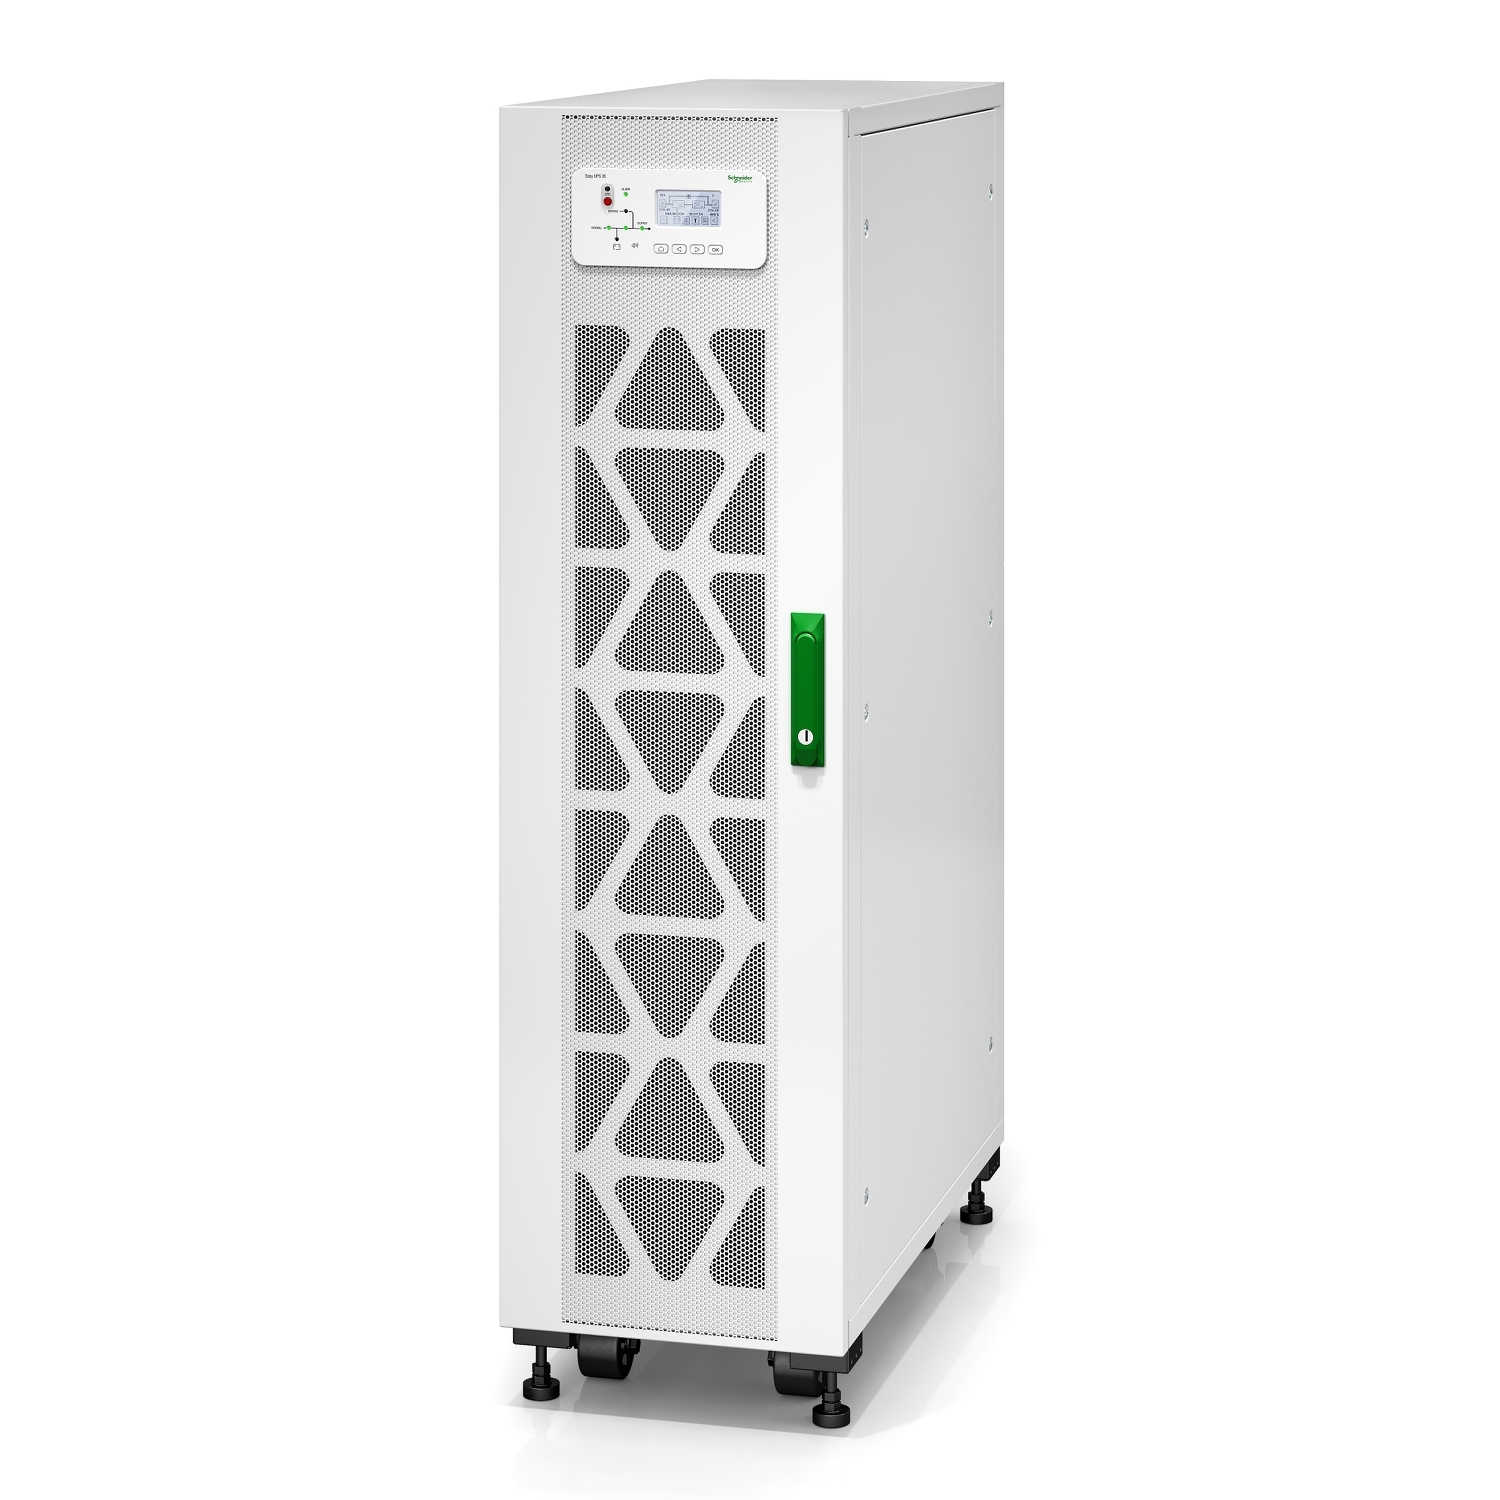 Easy UPS 3S 15 kVA 400 V 3:3 UPS with internal batteries - 25 minutes runtime